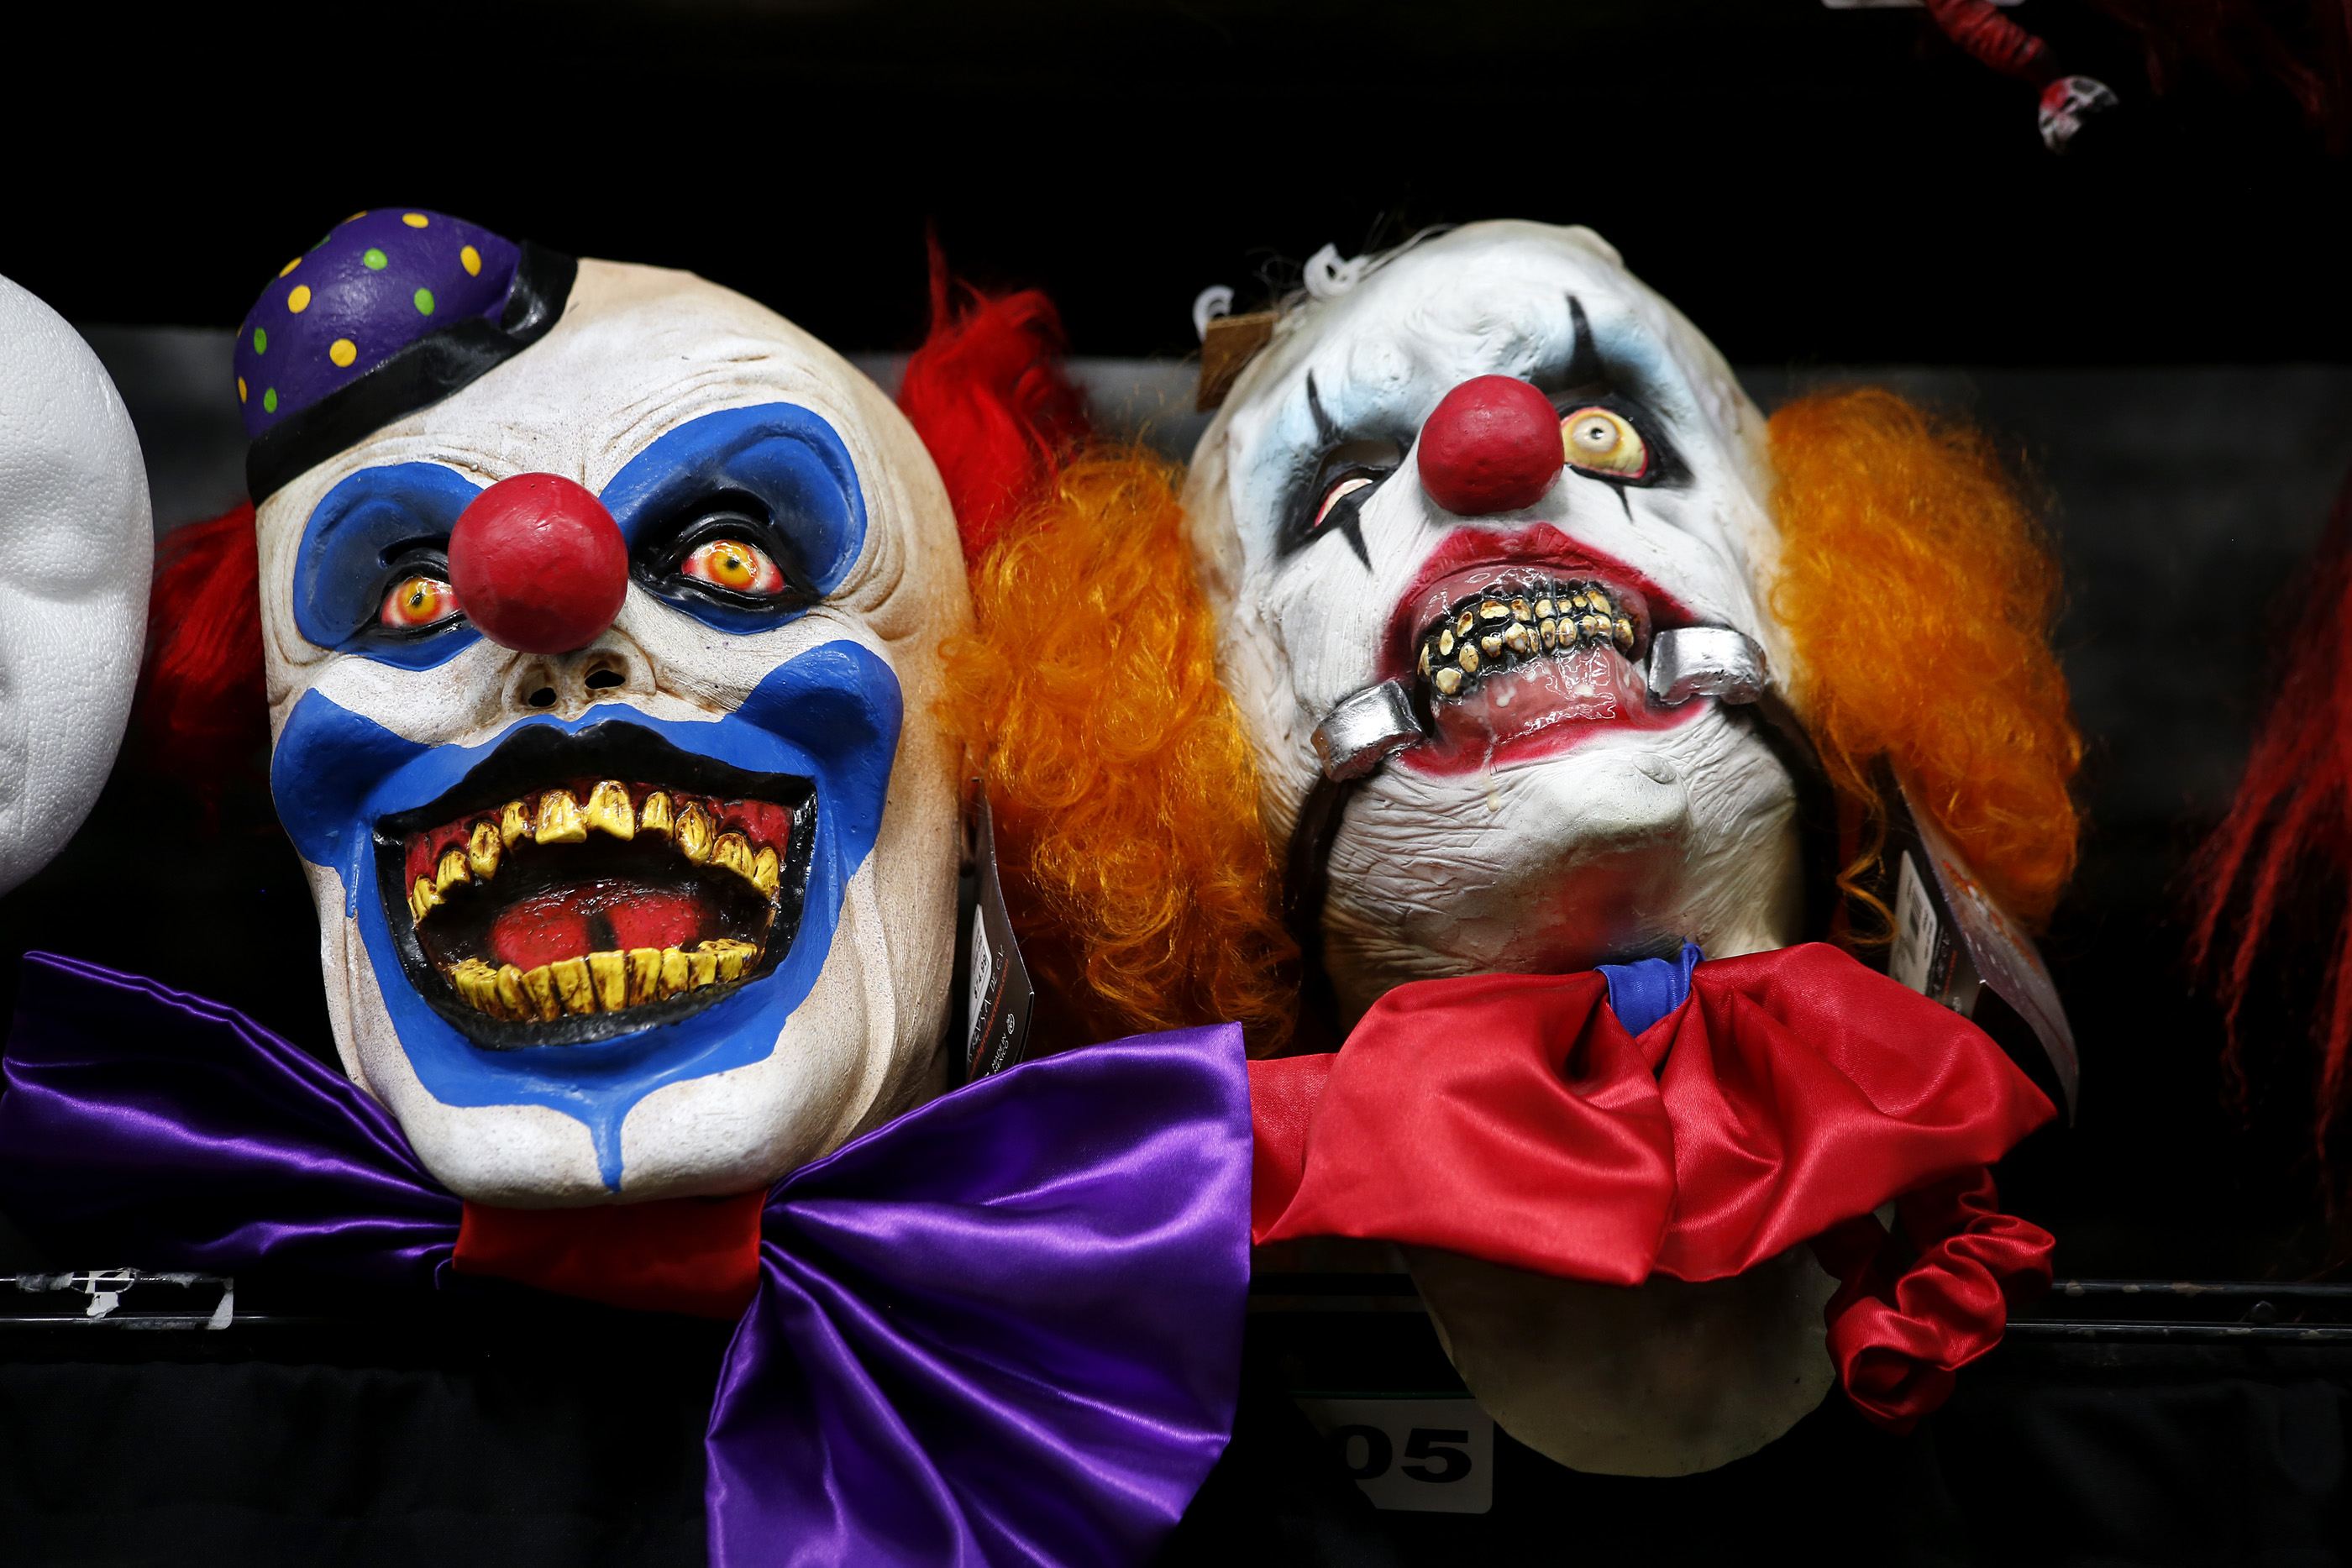 10/26/16 /LOS ANGELES/Halloween masks and decorations are seen for sale at the Halloween Club store in Montebello. (Photo Aurelia Ventura/ La Opinion)